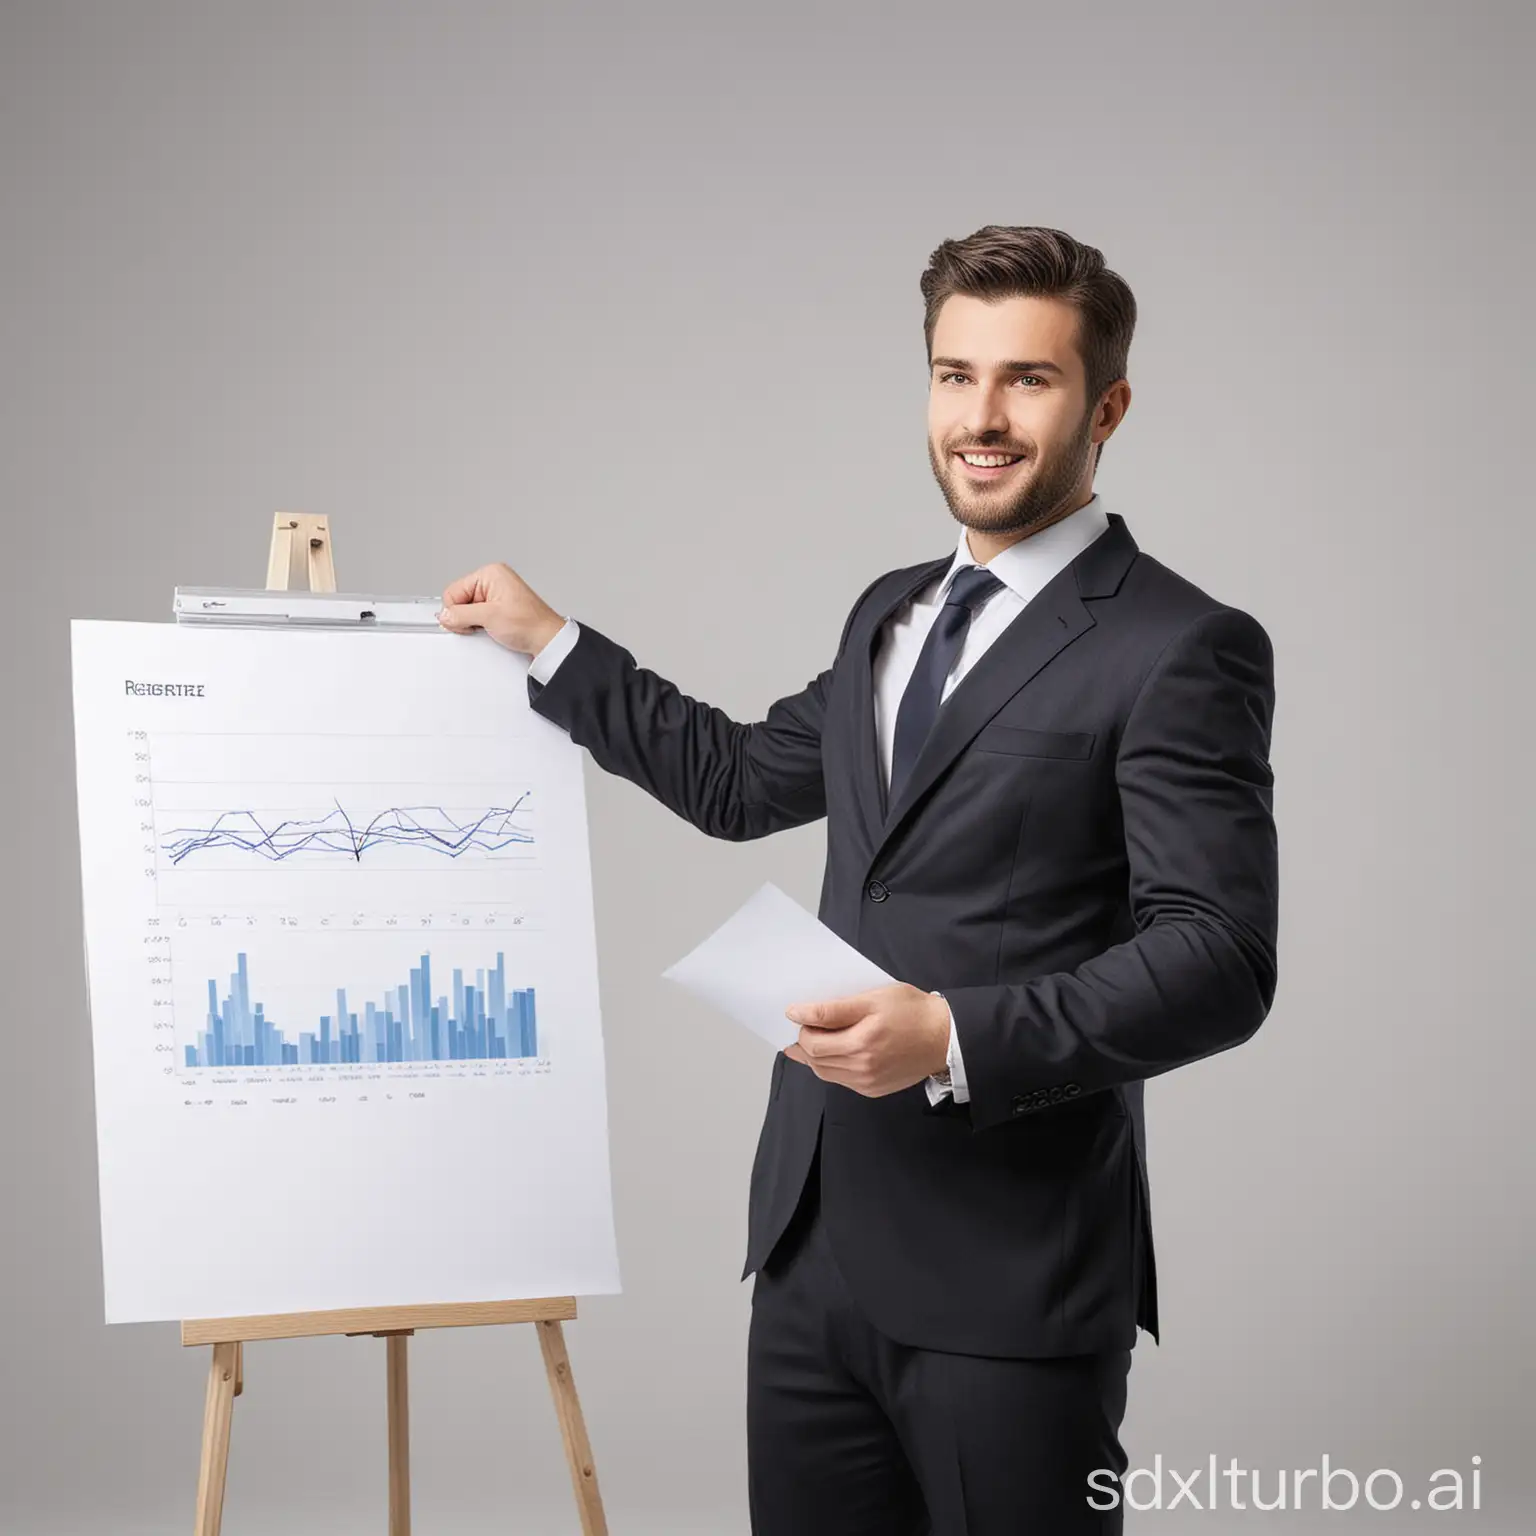 create an image on white background of a businessman presenting results ,
